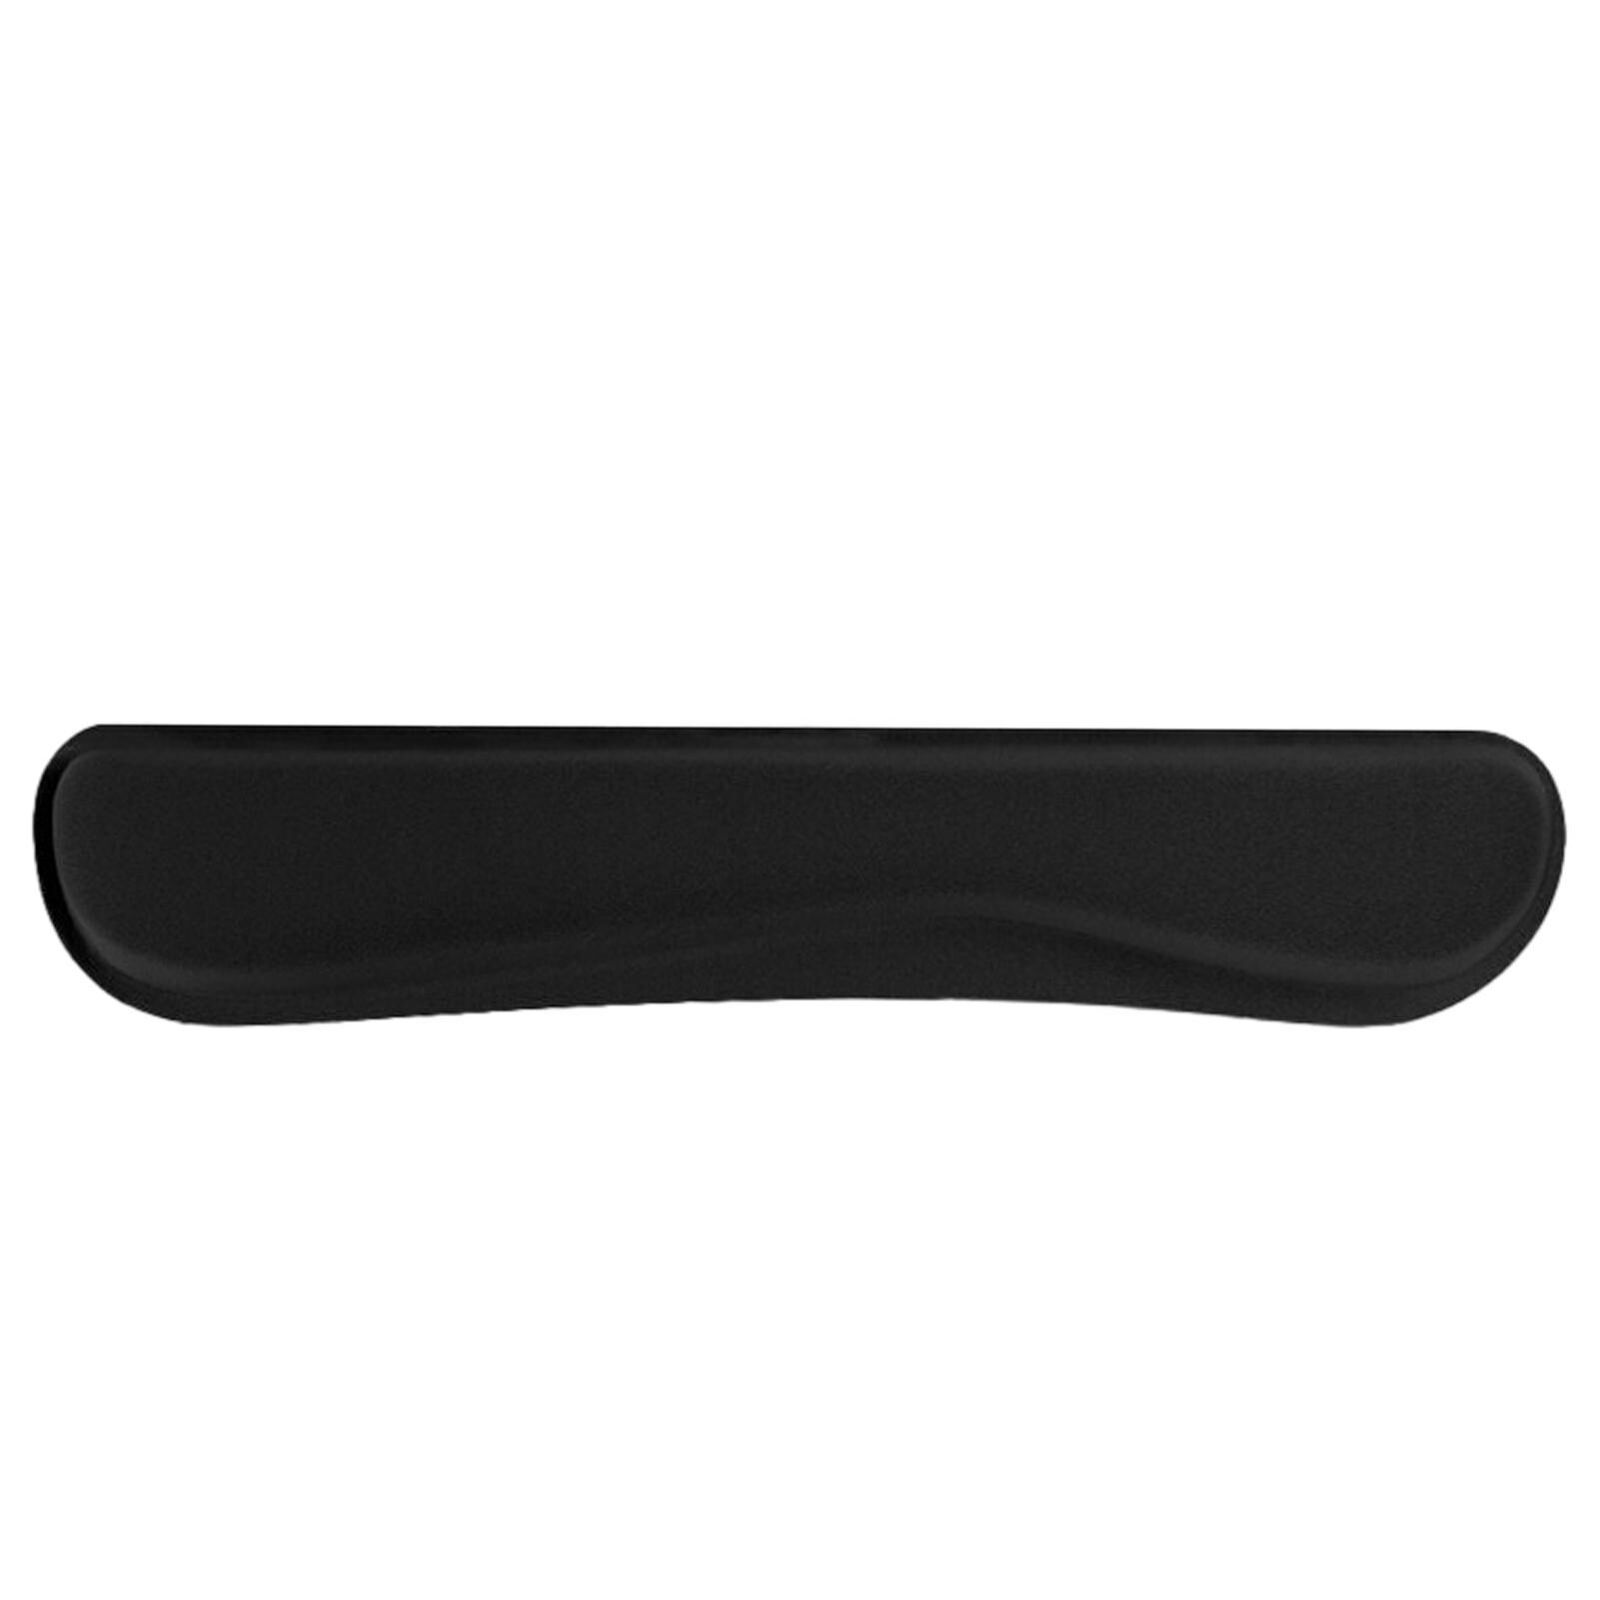 Keyboard Wrist Rest Pad and Mouse Gel Wrist Rest Support Cushion Foam